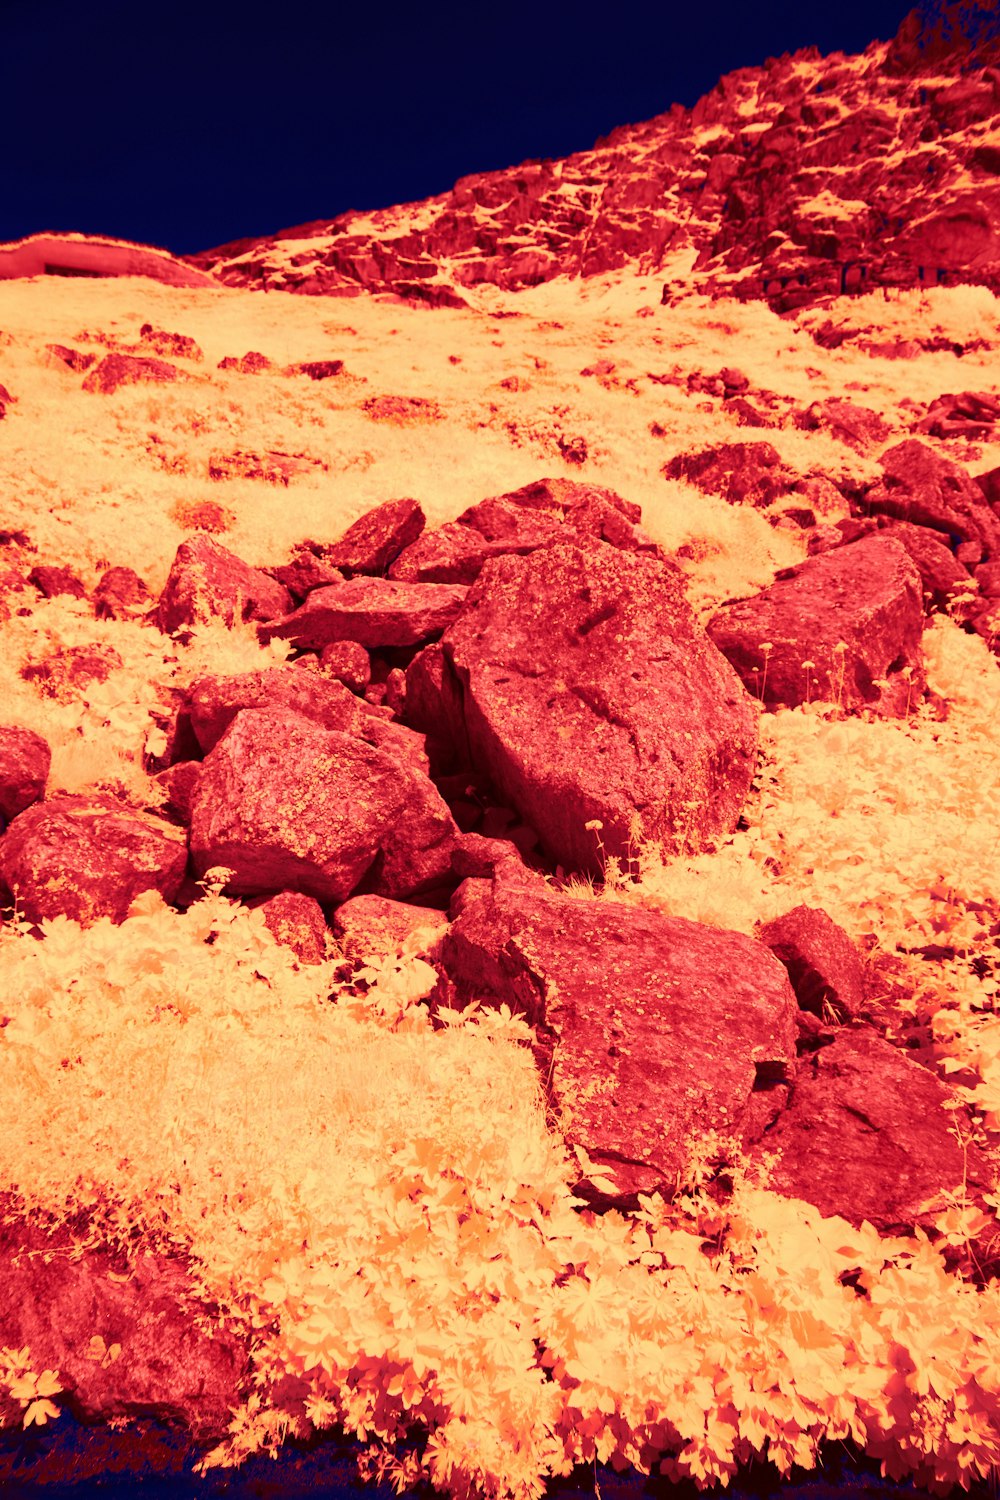 a red and yellow photo of rocks and dirt